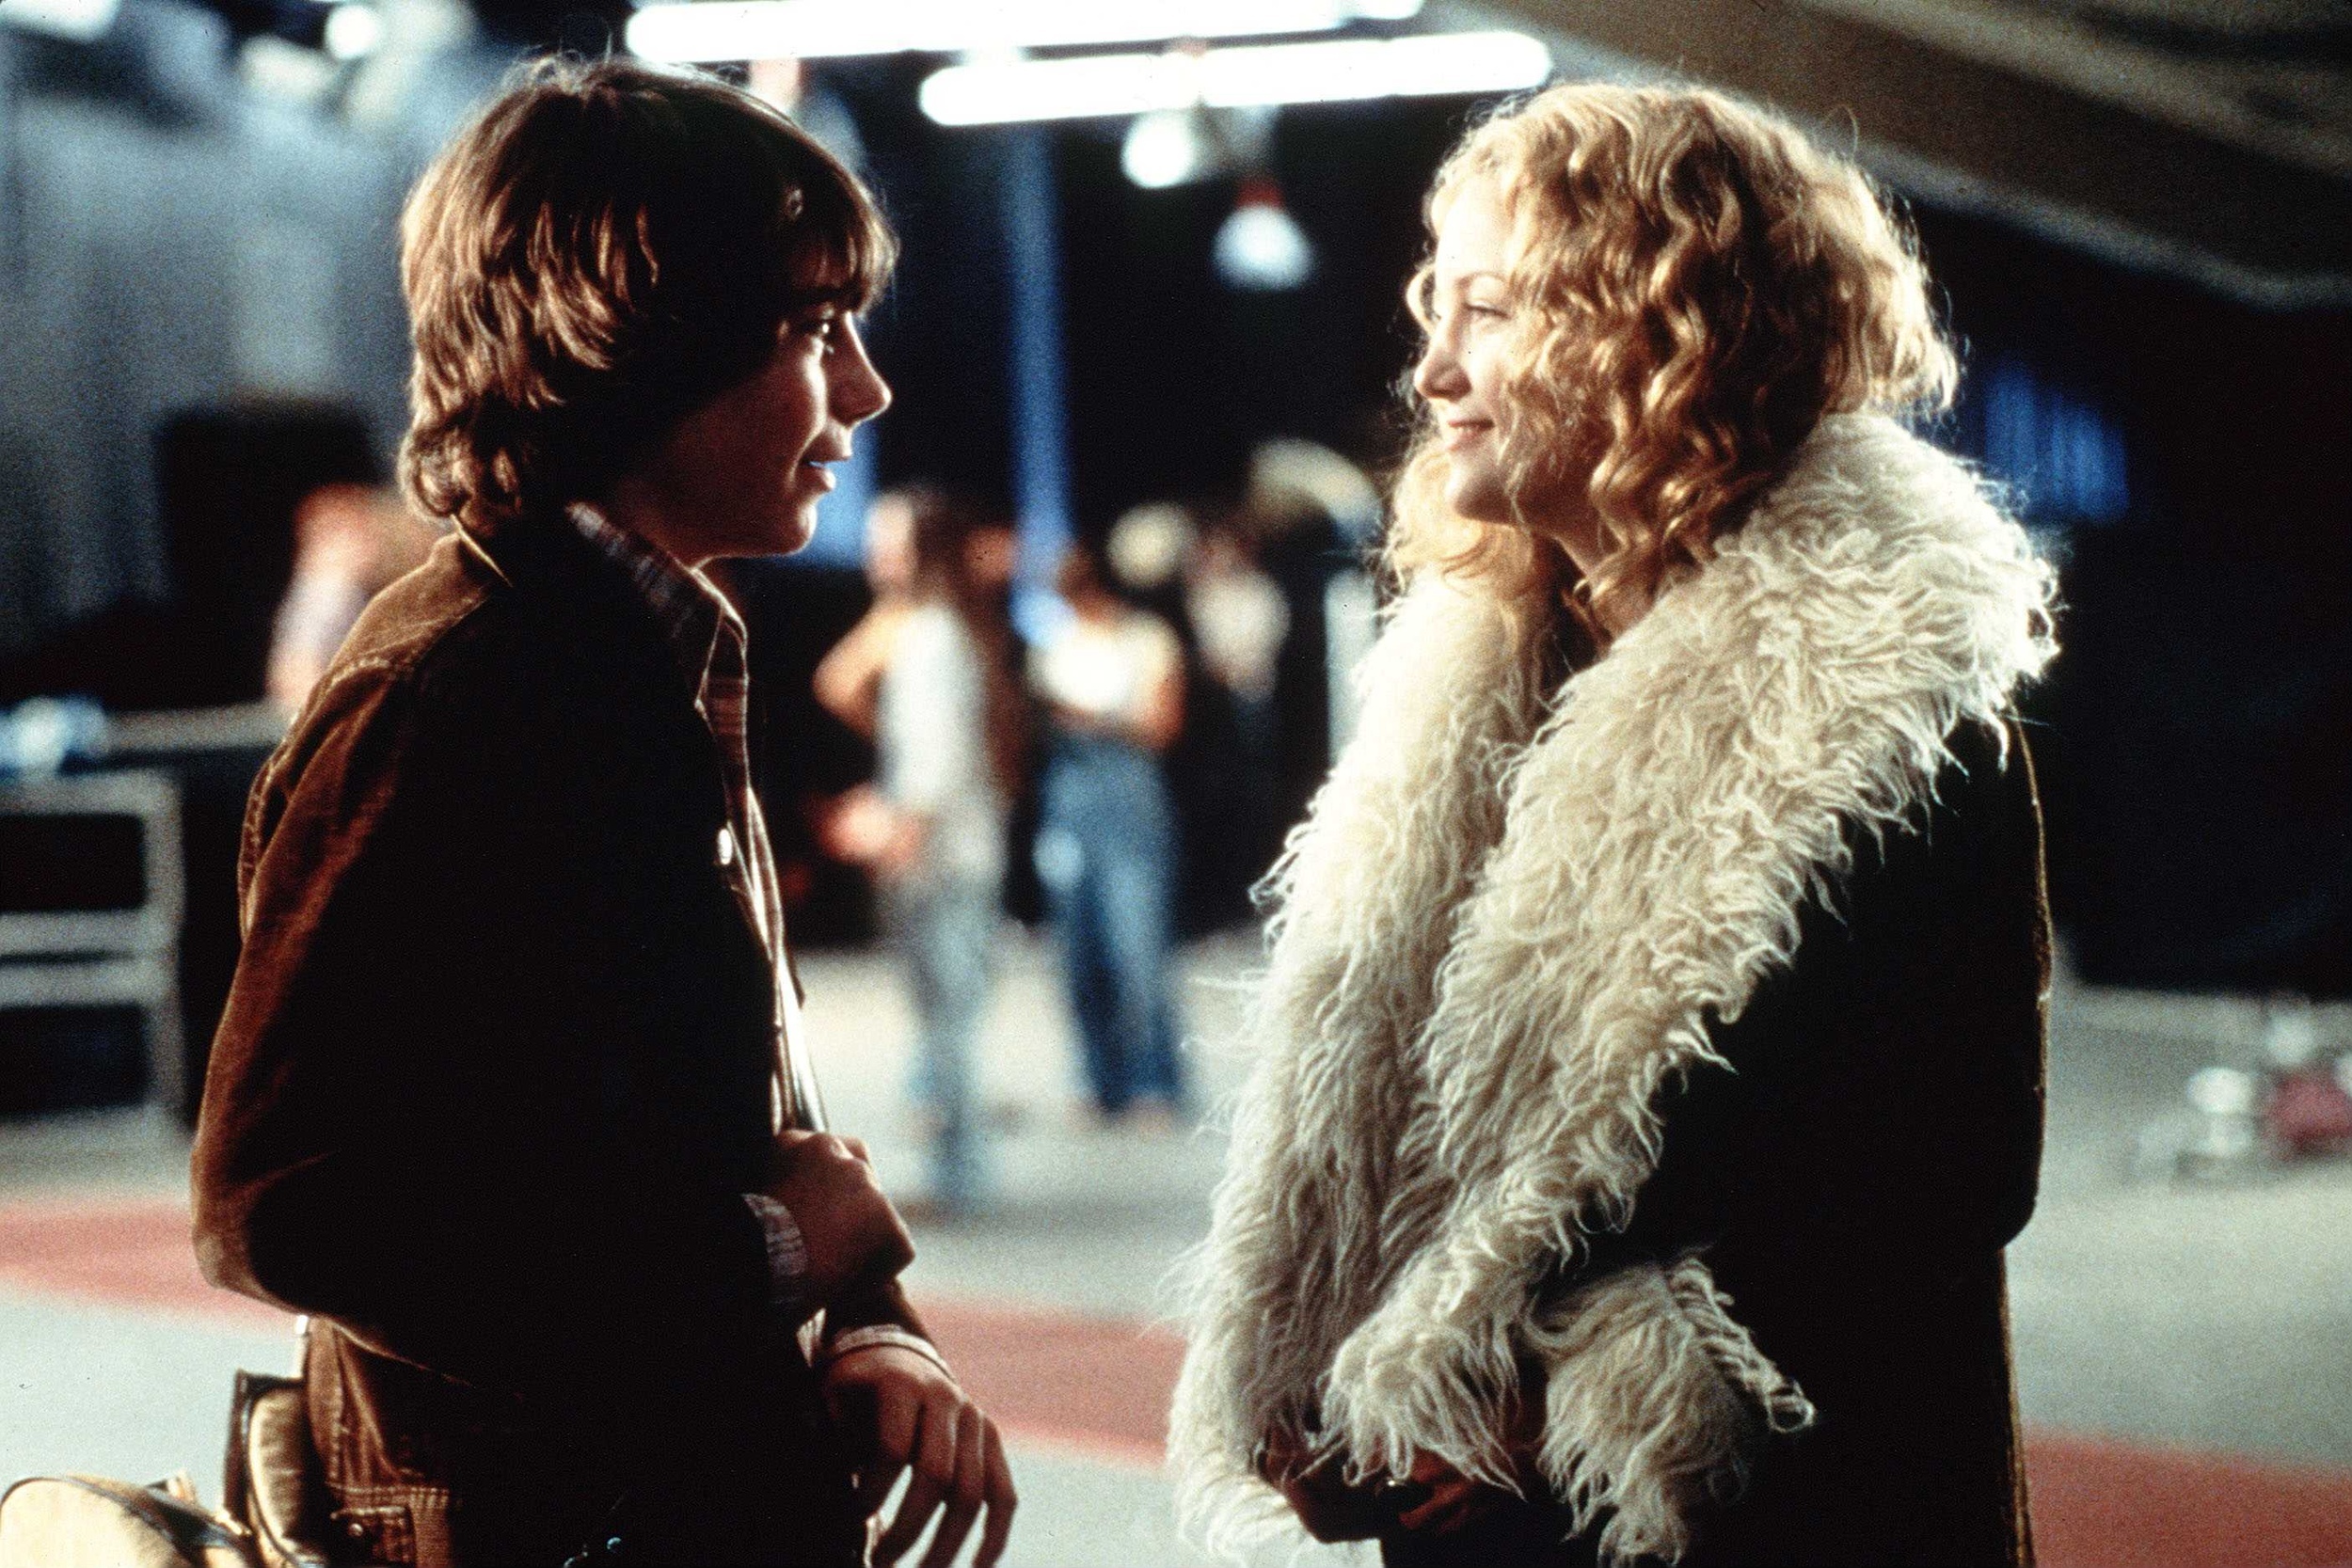 20 facts you might not know about 'Almost Famous'